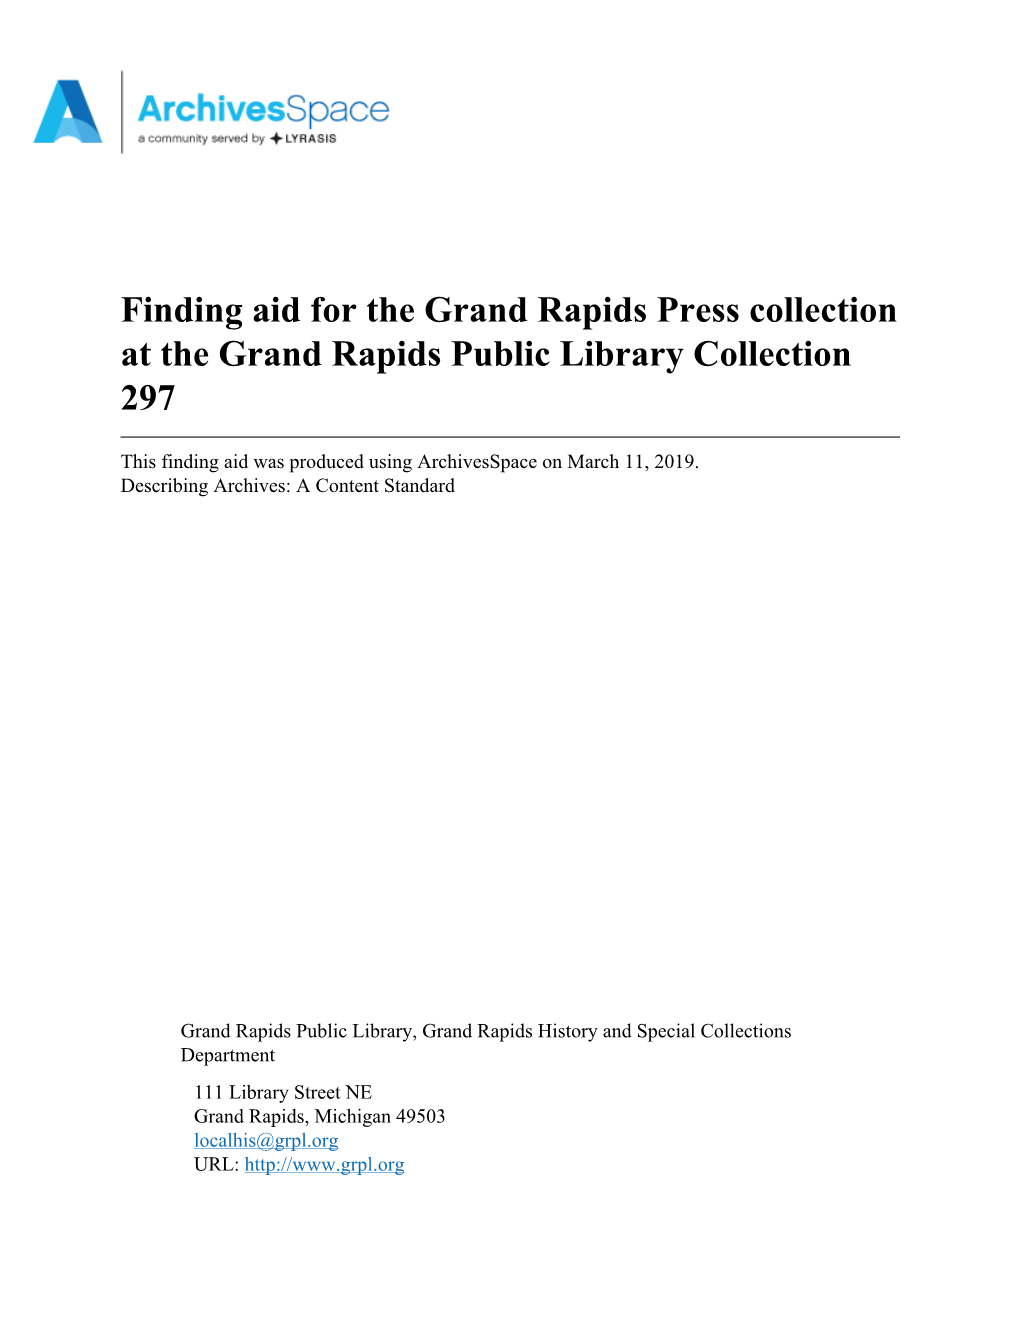 Finding Aid for the Grand Rapids Press Collection at the Grand Rapids Public Library Collection 297